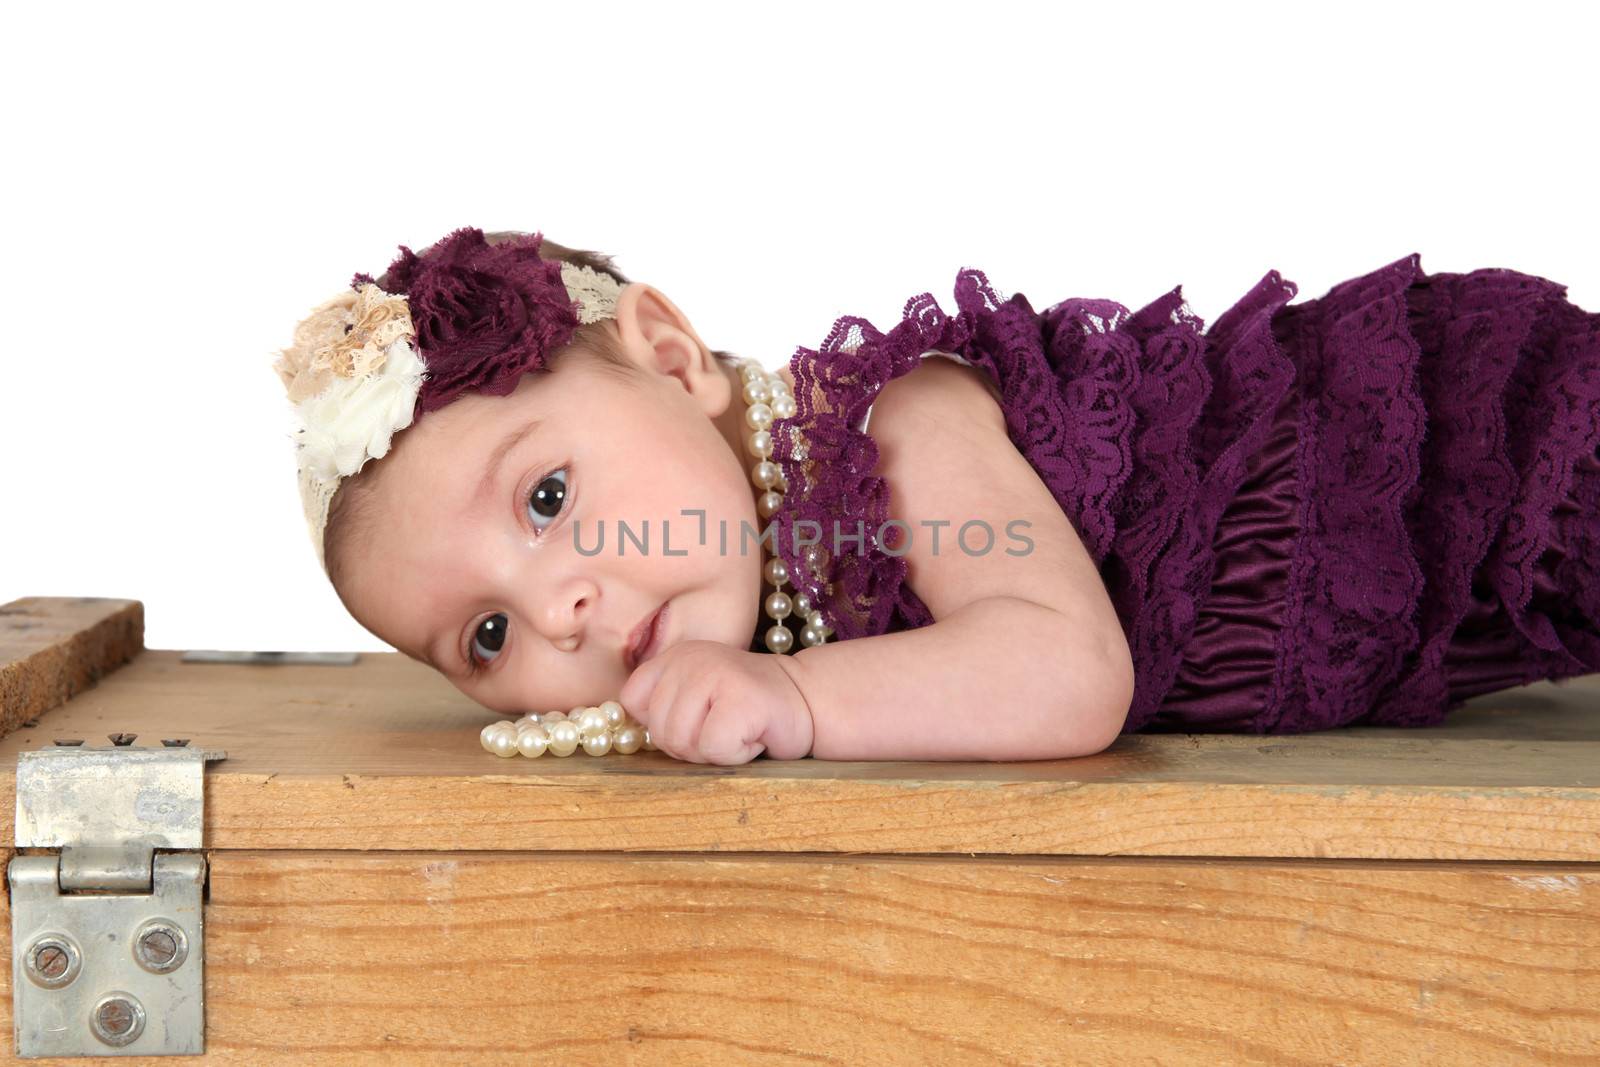 Brunette baby girl wearing a purple romper with pearls